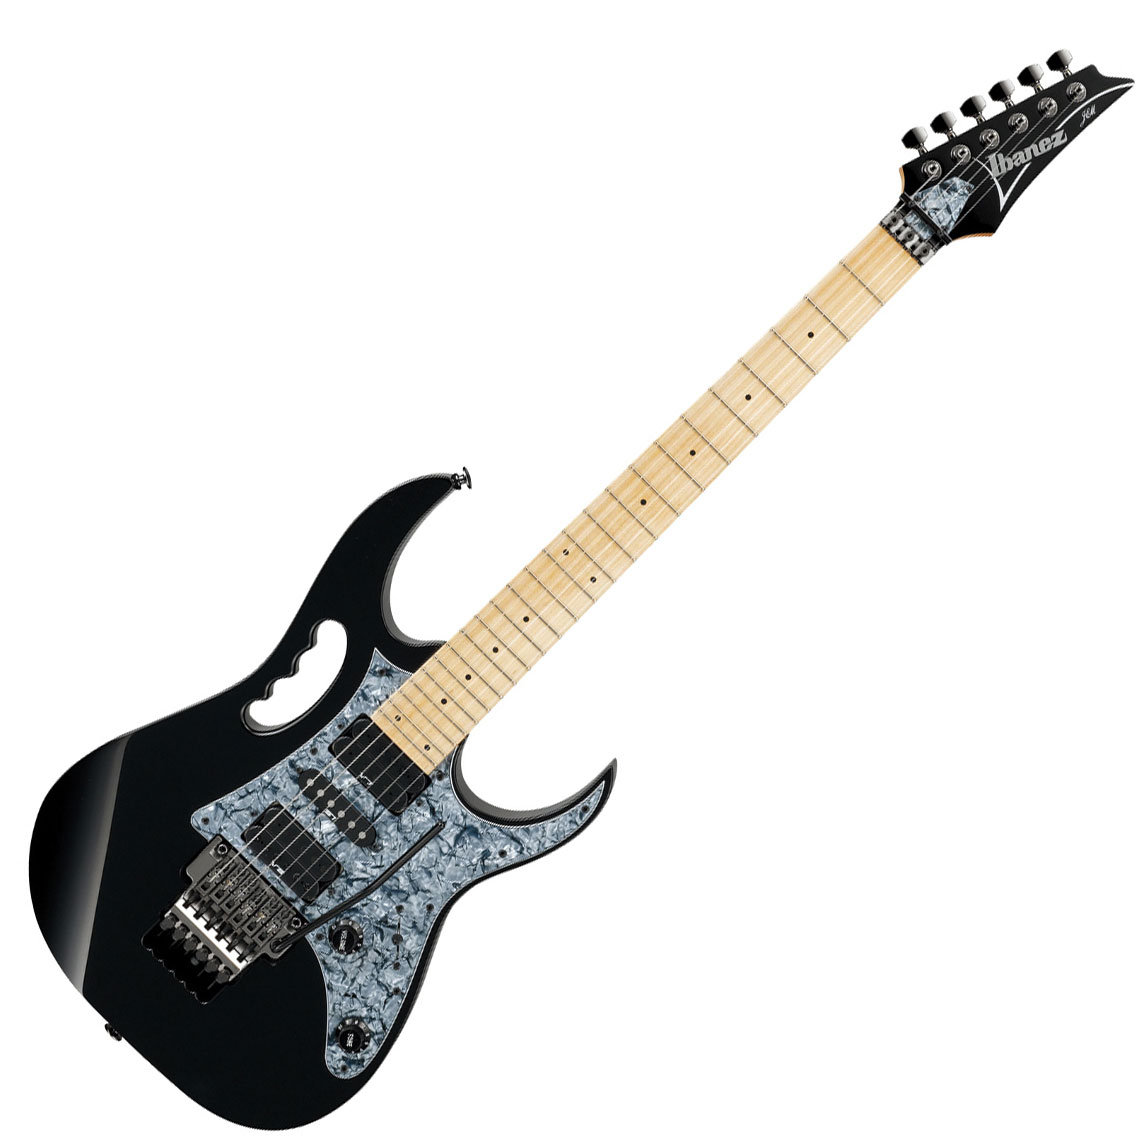 Ibanez Guitar 13124 Hd Wallpapers in Music   Imagescicom